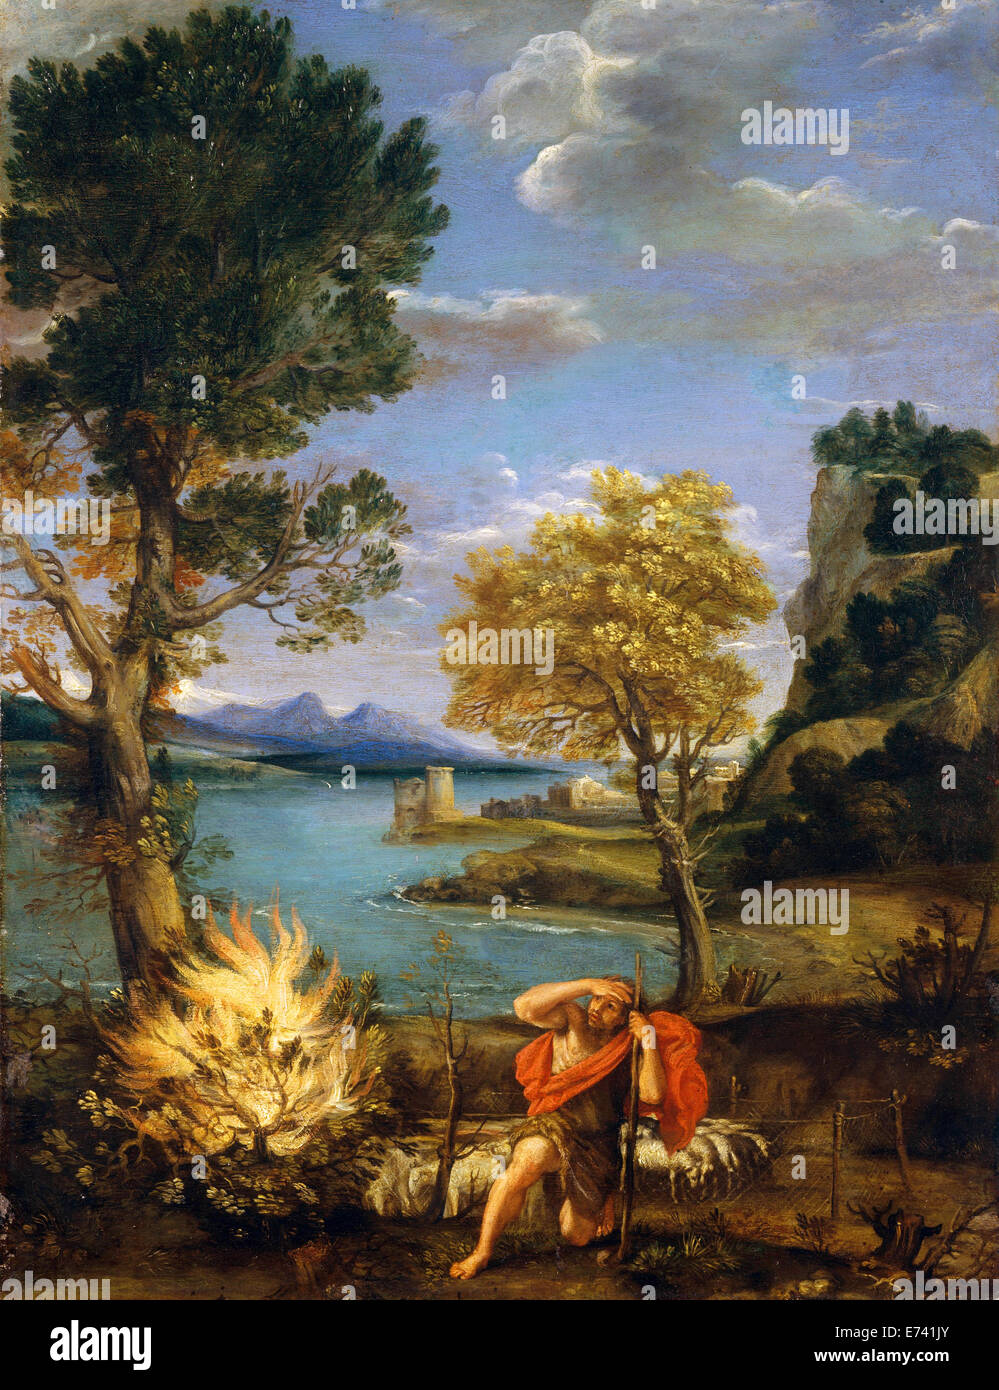 Landscape with Moses and the Burning Bush - by Domenichino, 1616 Stock Photo